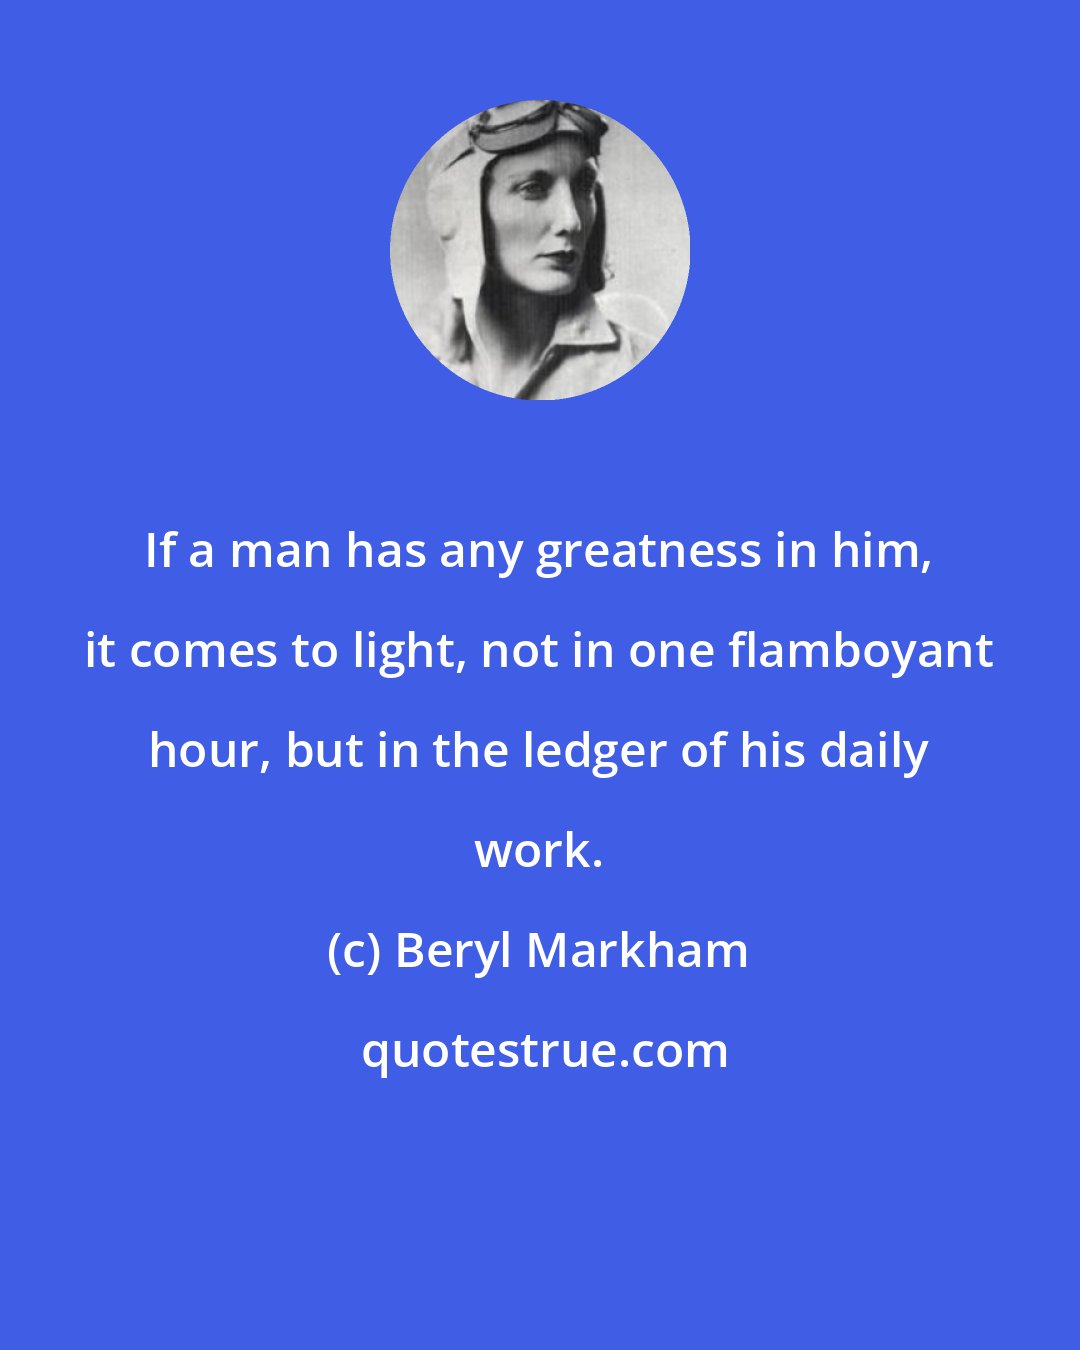 Beryl Markham: If a man has any greatness in him, it comes to light, not in one flamboyant hour, but in the ledger of his daily work.